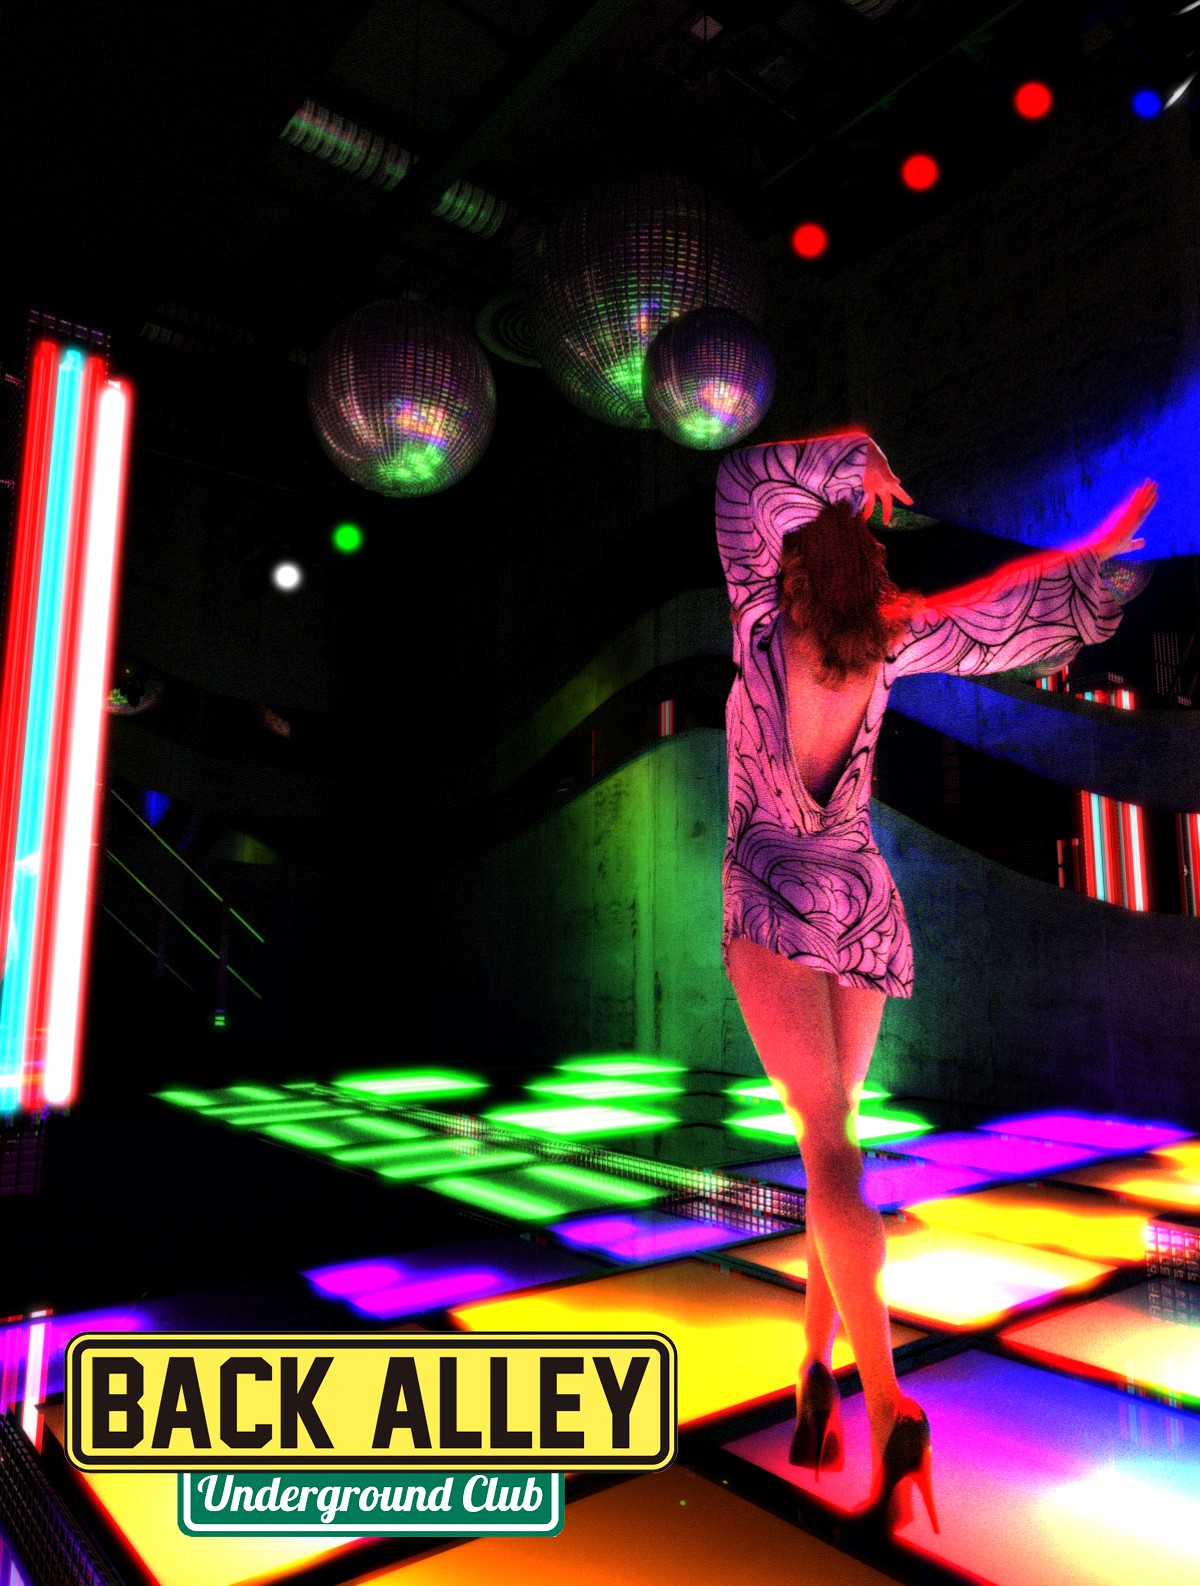 Back Alley Underground Club for DS Iray - Extended License